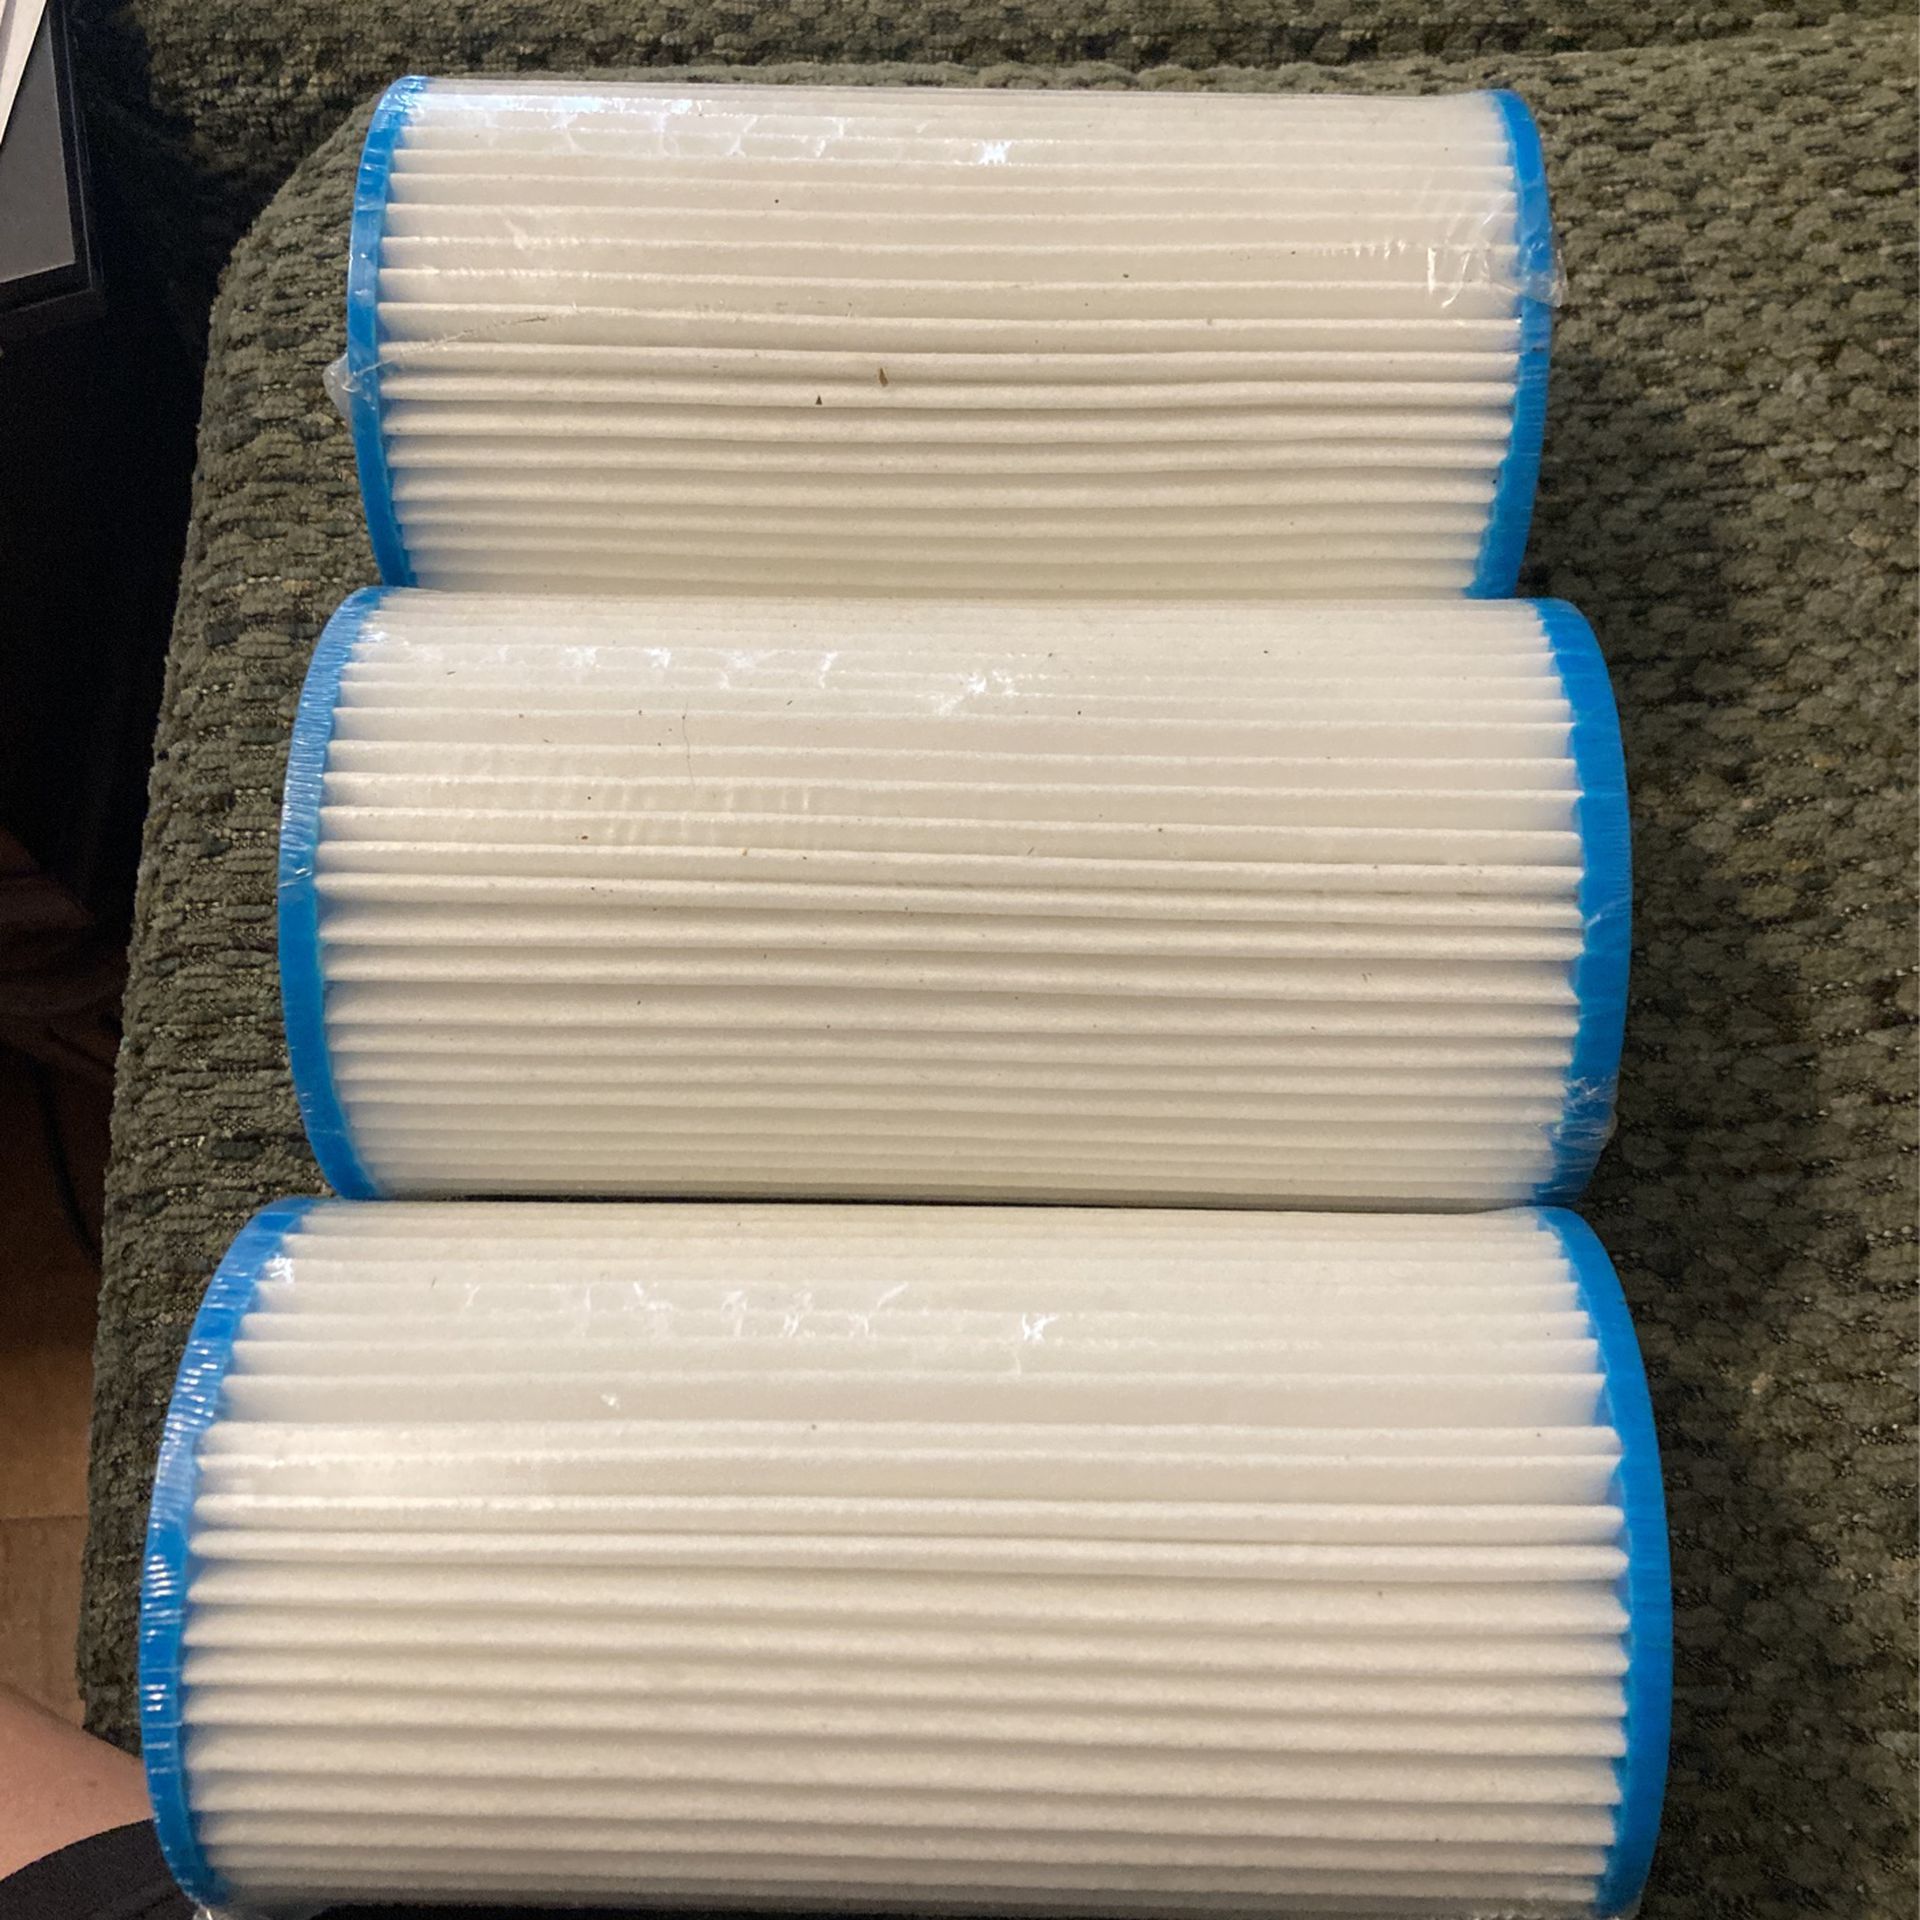 3 Pool filters new in great condition3